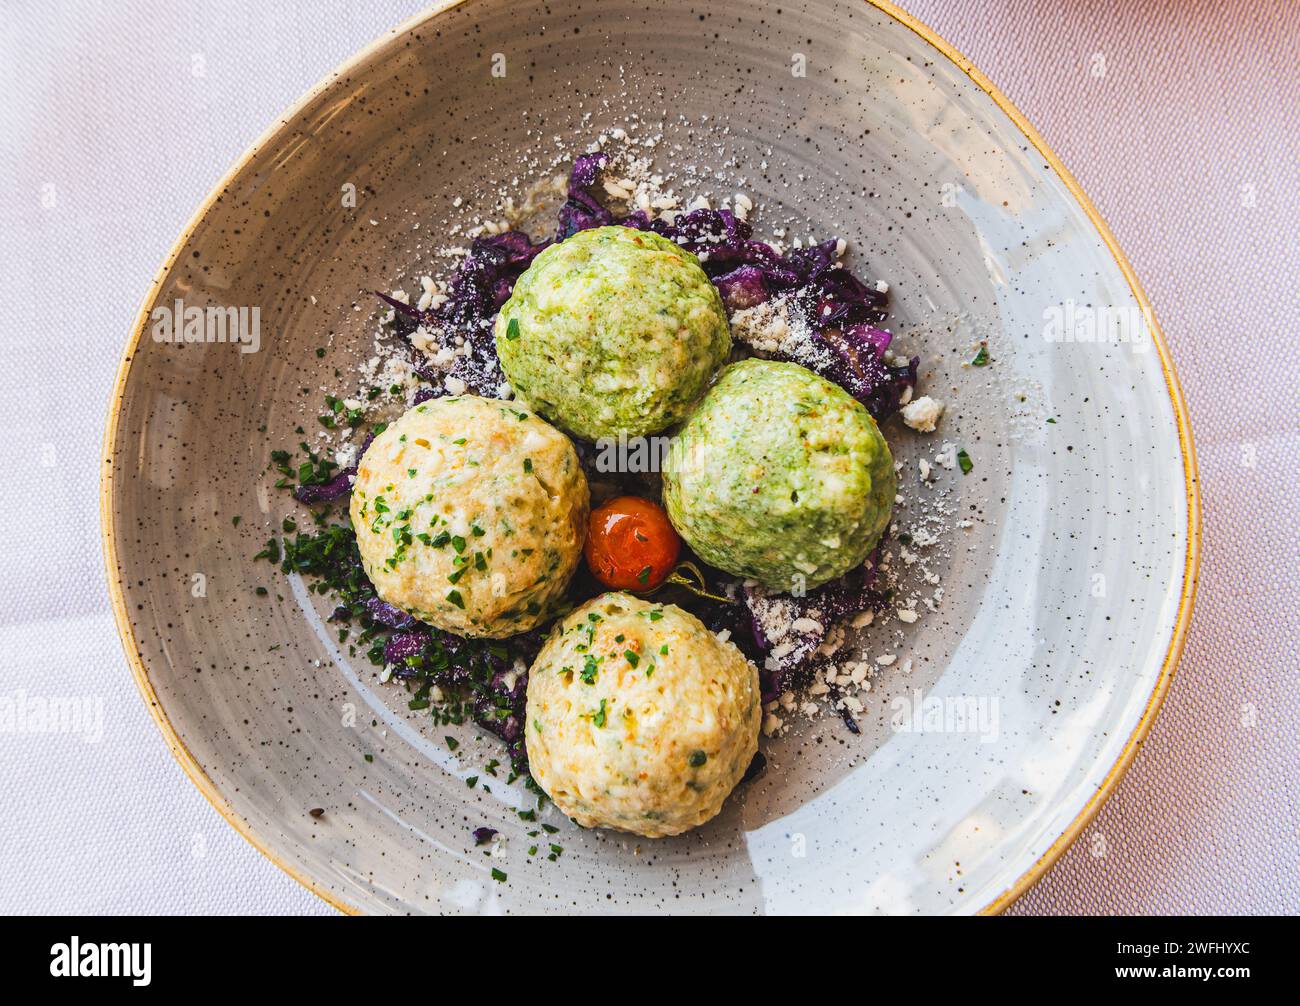 Knödel or Canederli bread dumplings, a typical speciality of Alto Adige or South Tyrol, Trentino Alto Adige, northern Italy Stock Photo